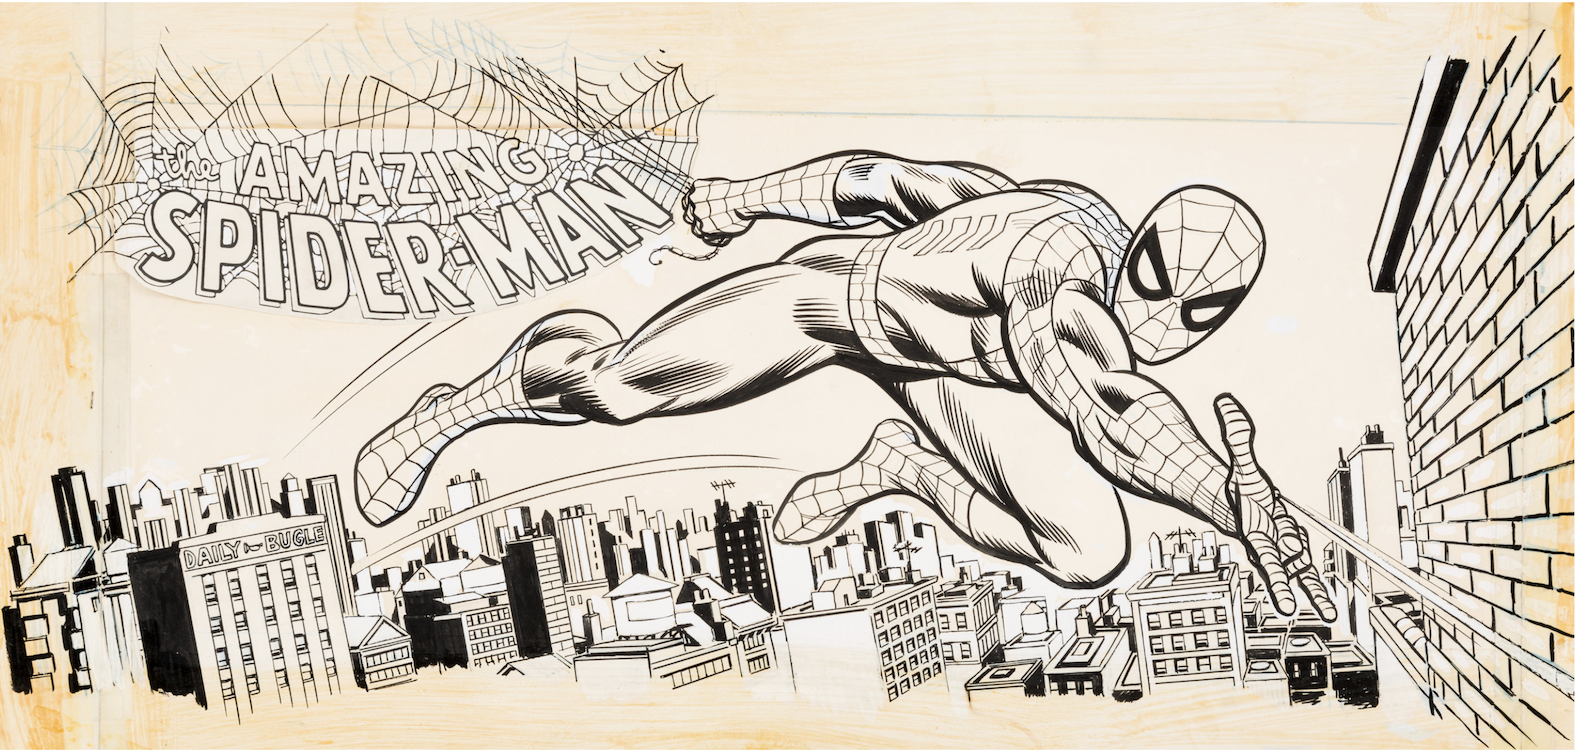 Spider-Man Illustration by John Romita Sr. sold for $7,770. Click here to get your original art appraised.